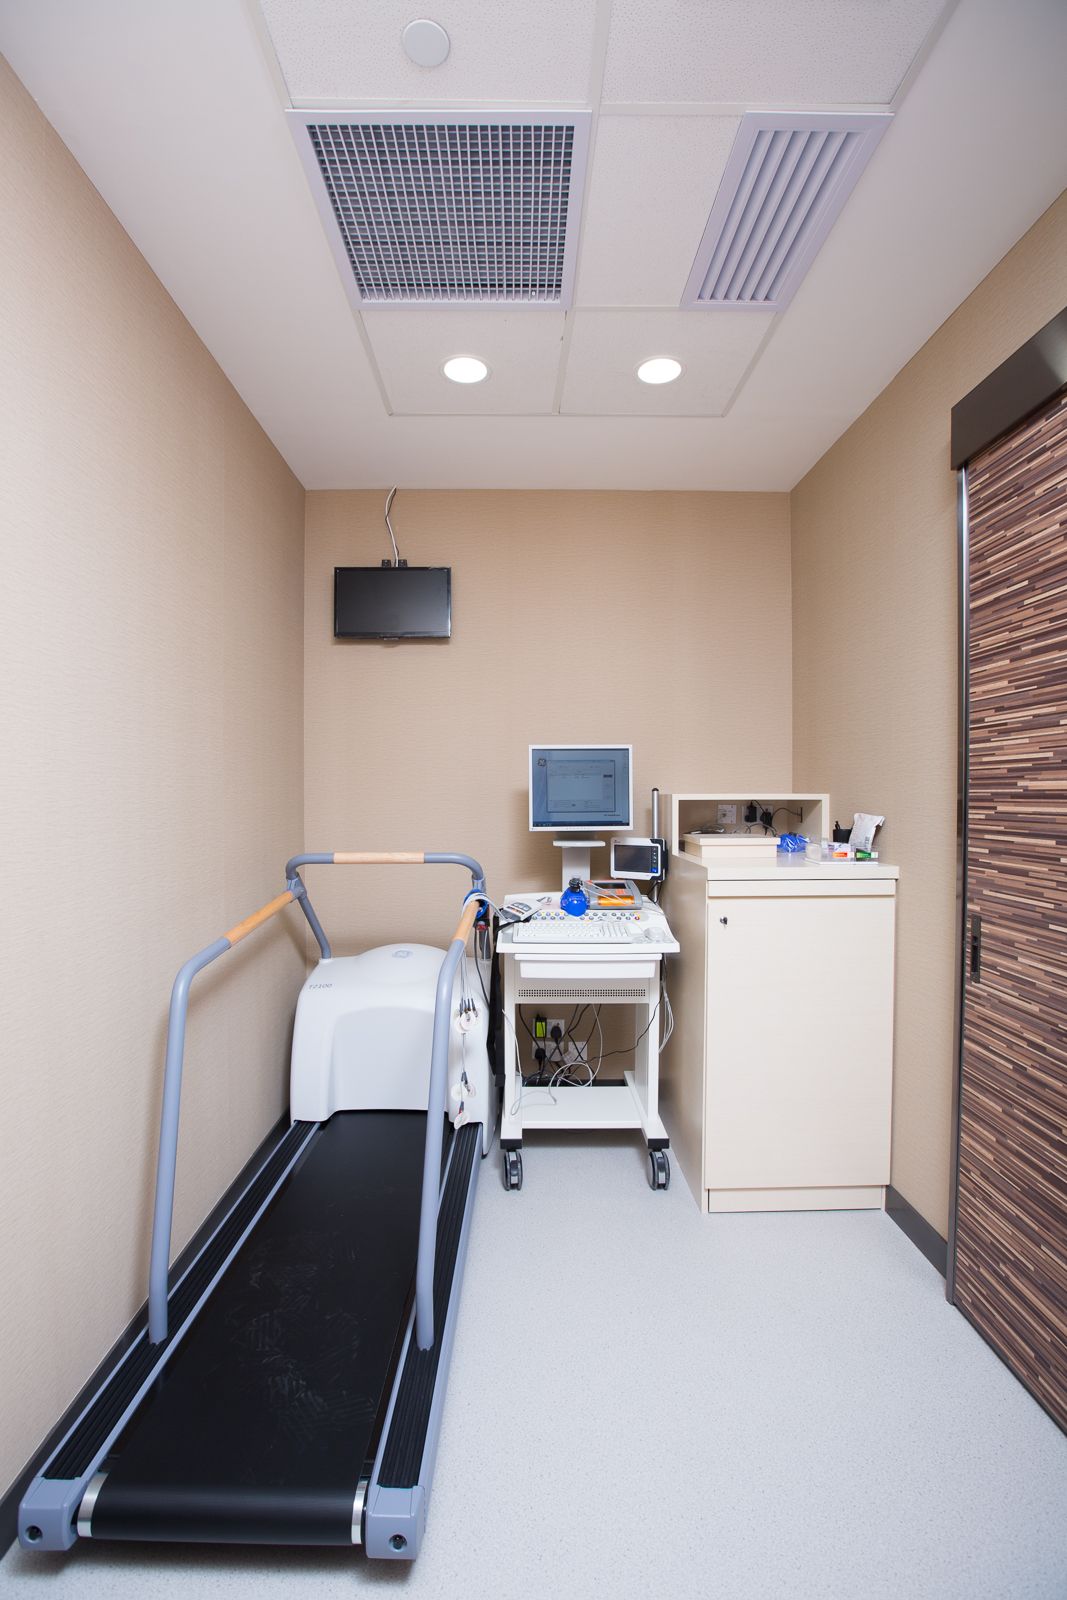 Examination room with treadmill and diagnostic equipment